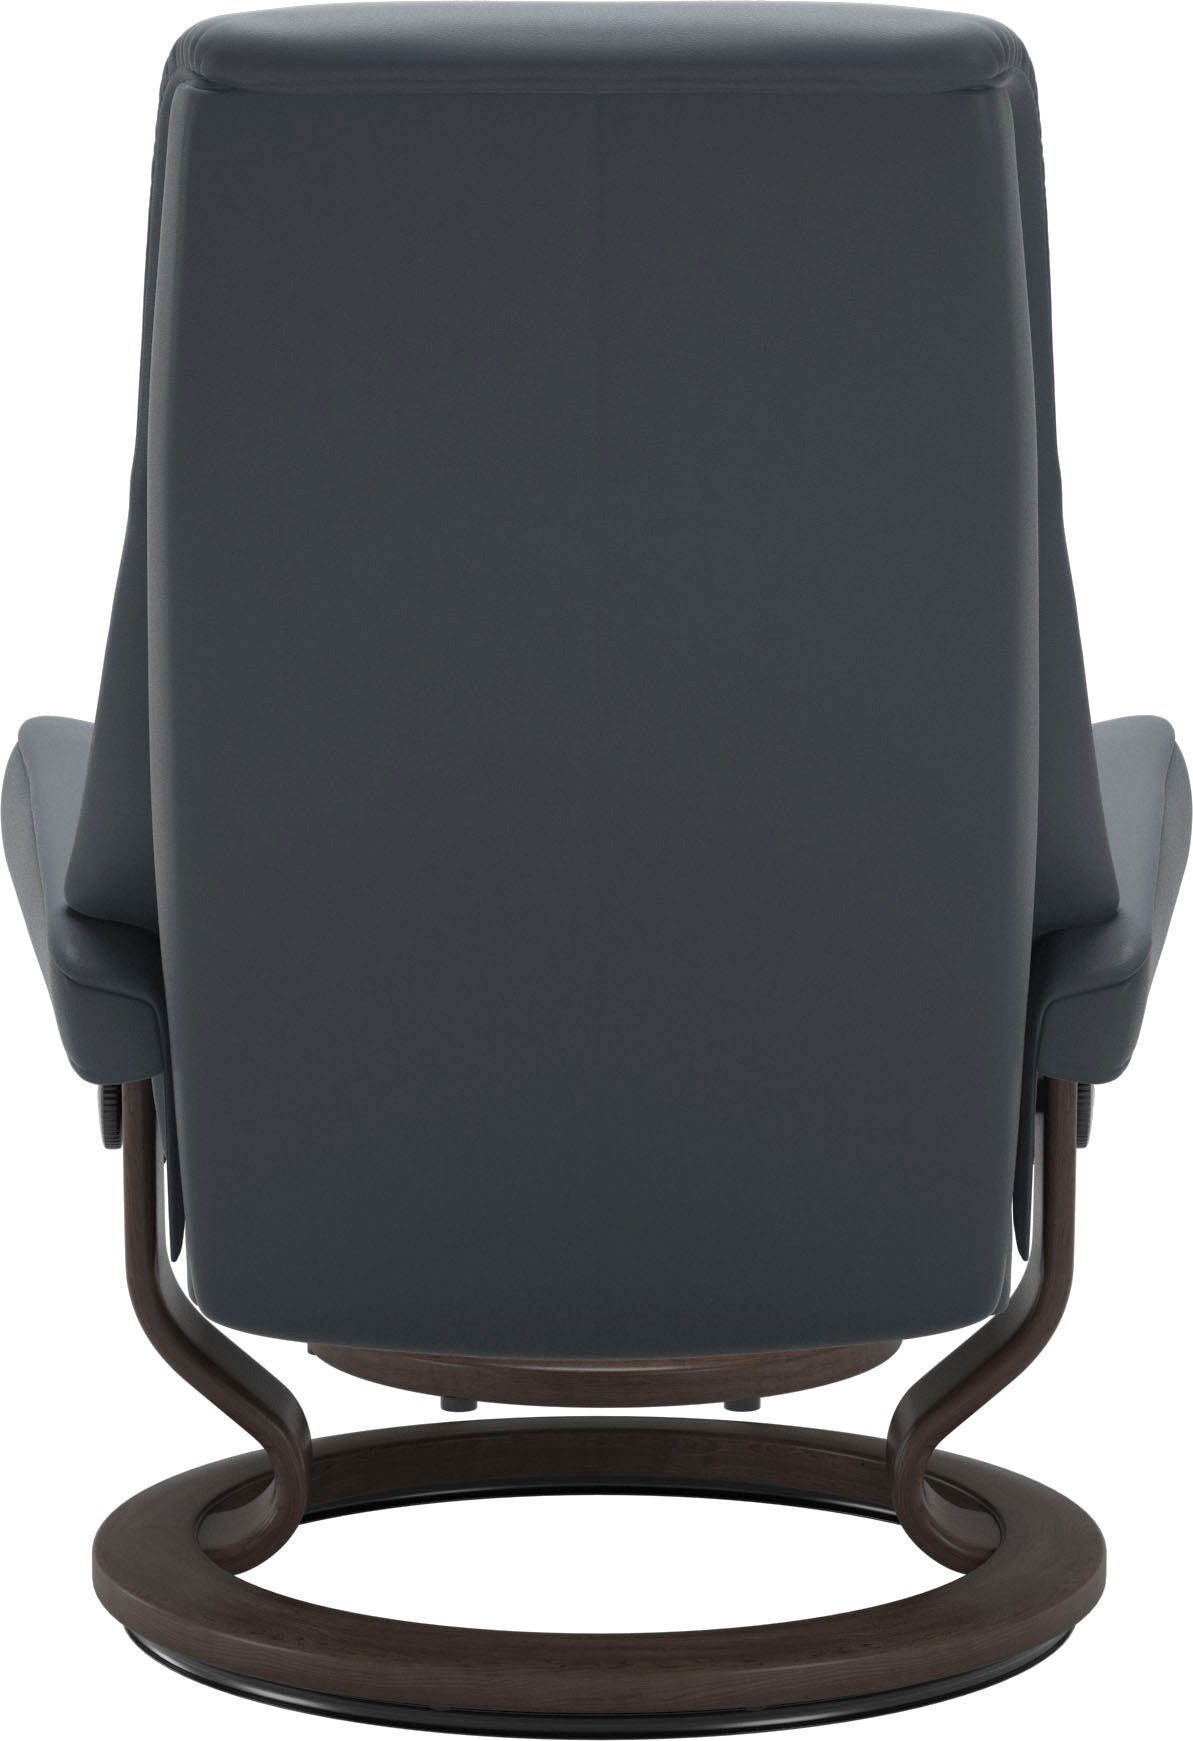 View, Relaxsessel Classic S,Gestell mit Base, Stressless® Wenge Größe